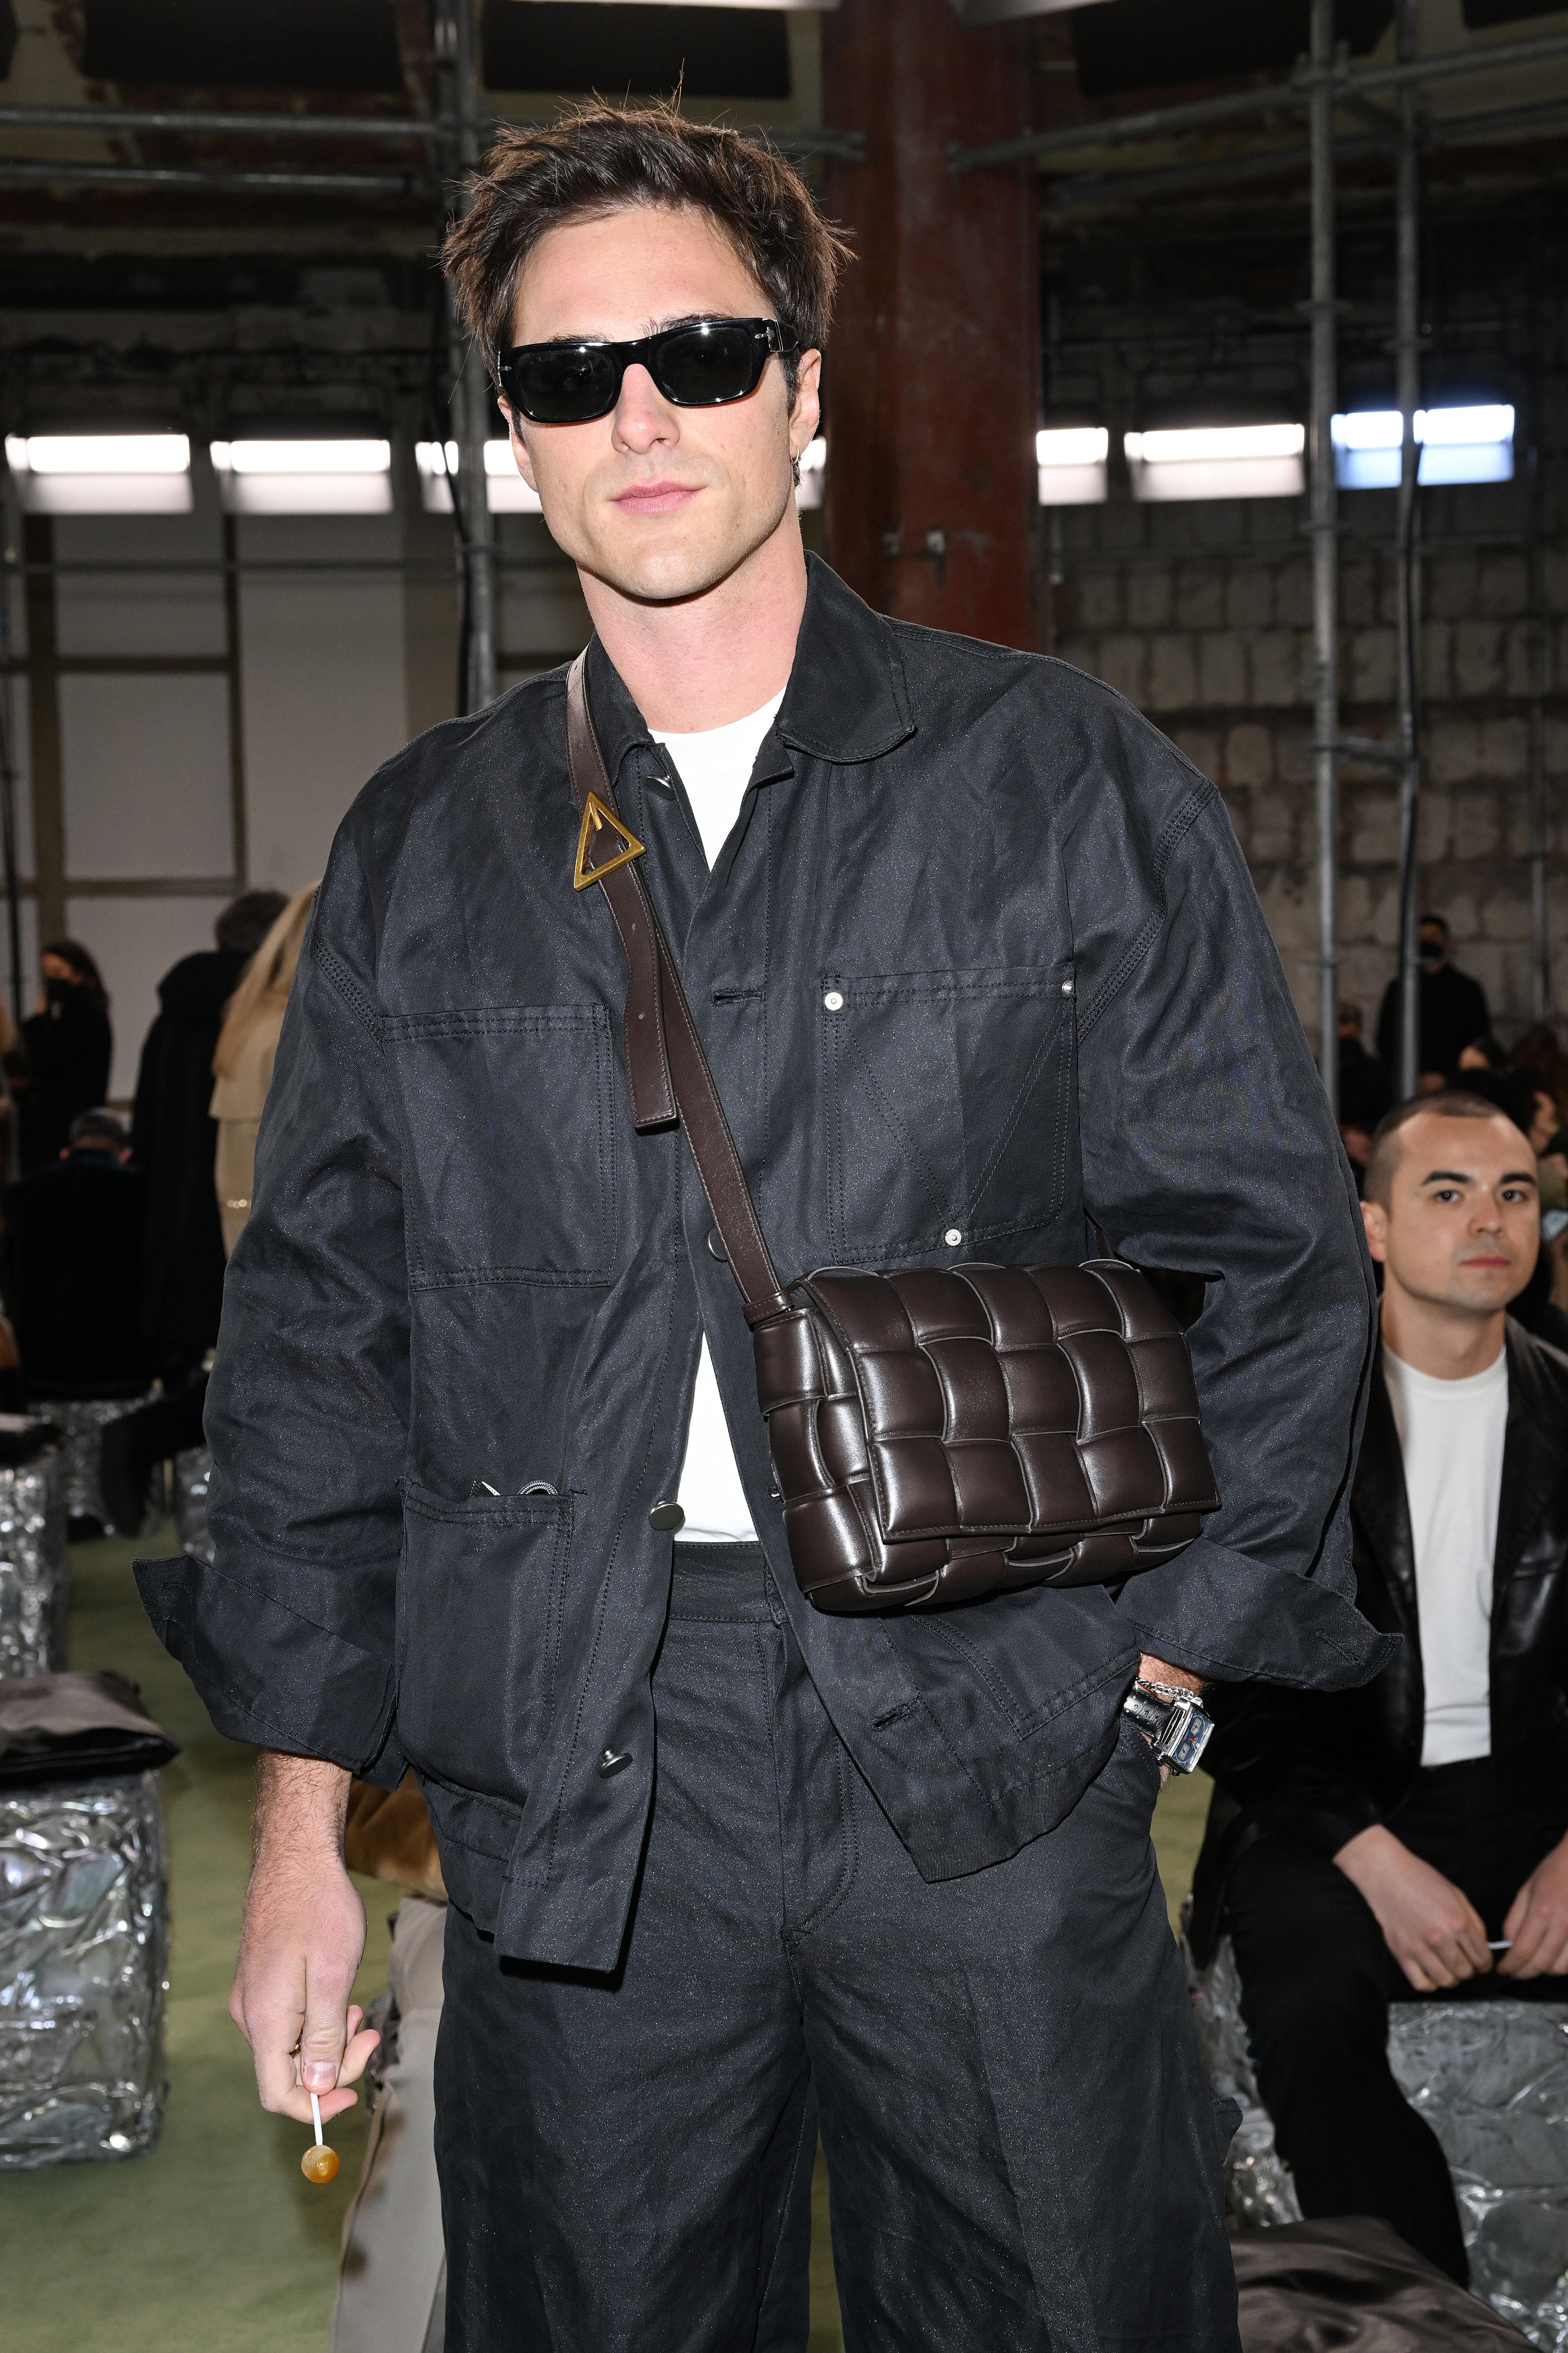 Close-up of Jacob in a jacket with a small shoulder bag that reaches his waist and holding a lollipop